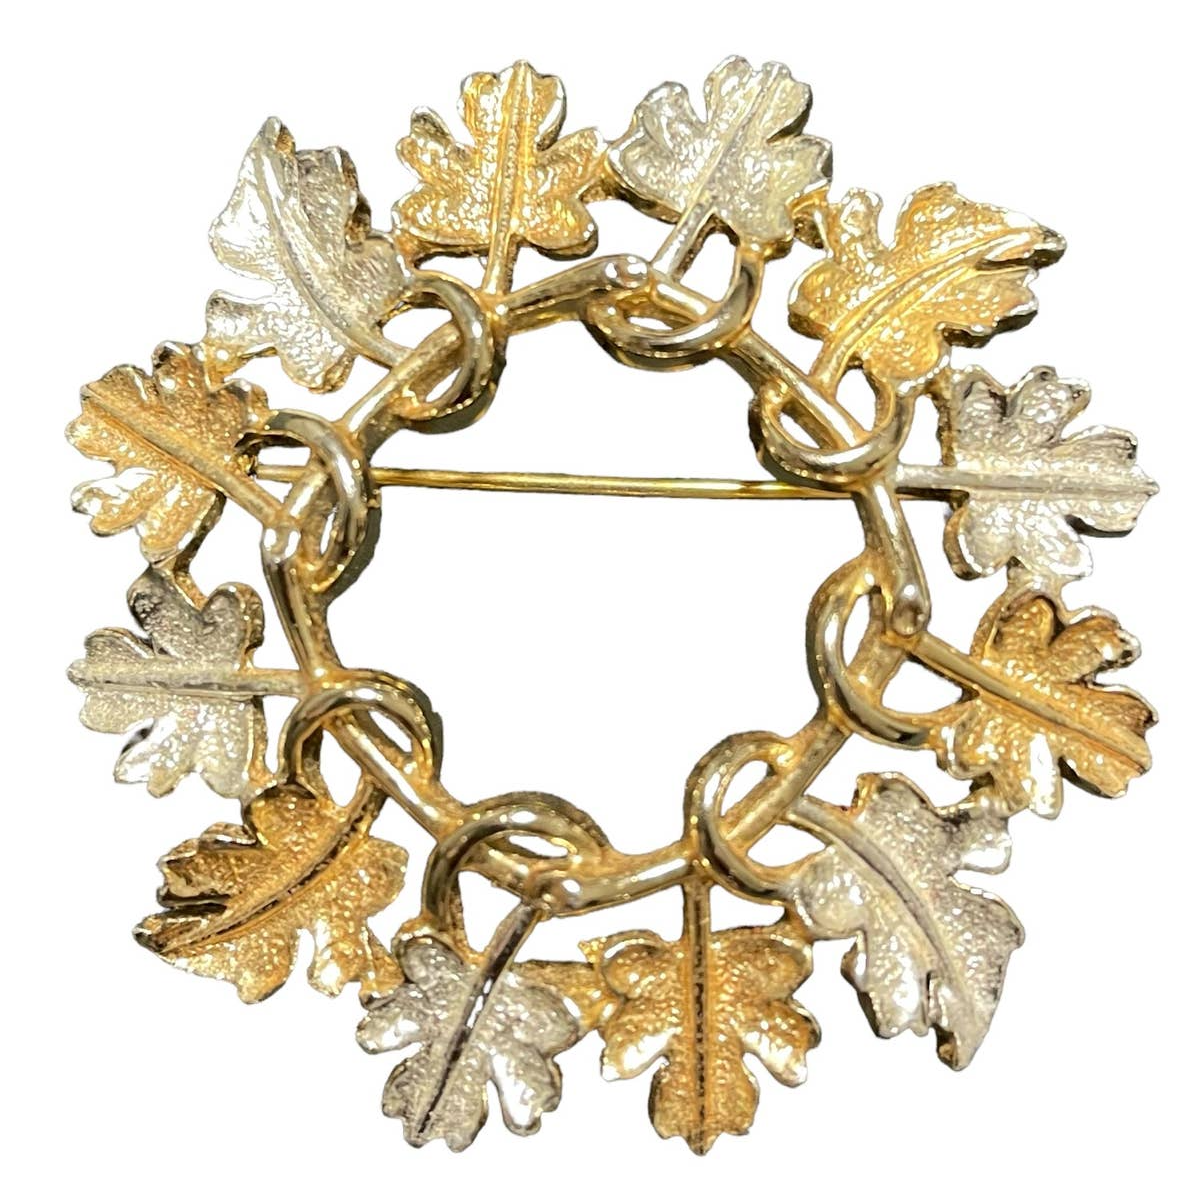 Primary image for Vintage Sarah Coventry Signed Two Tone Autumn Leaves Wreath Garland Brooch